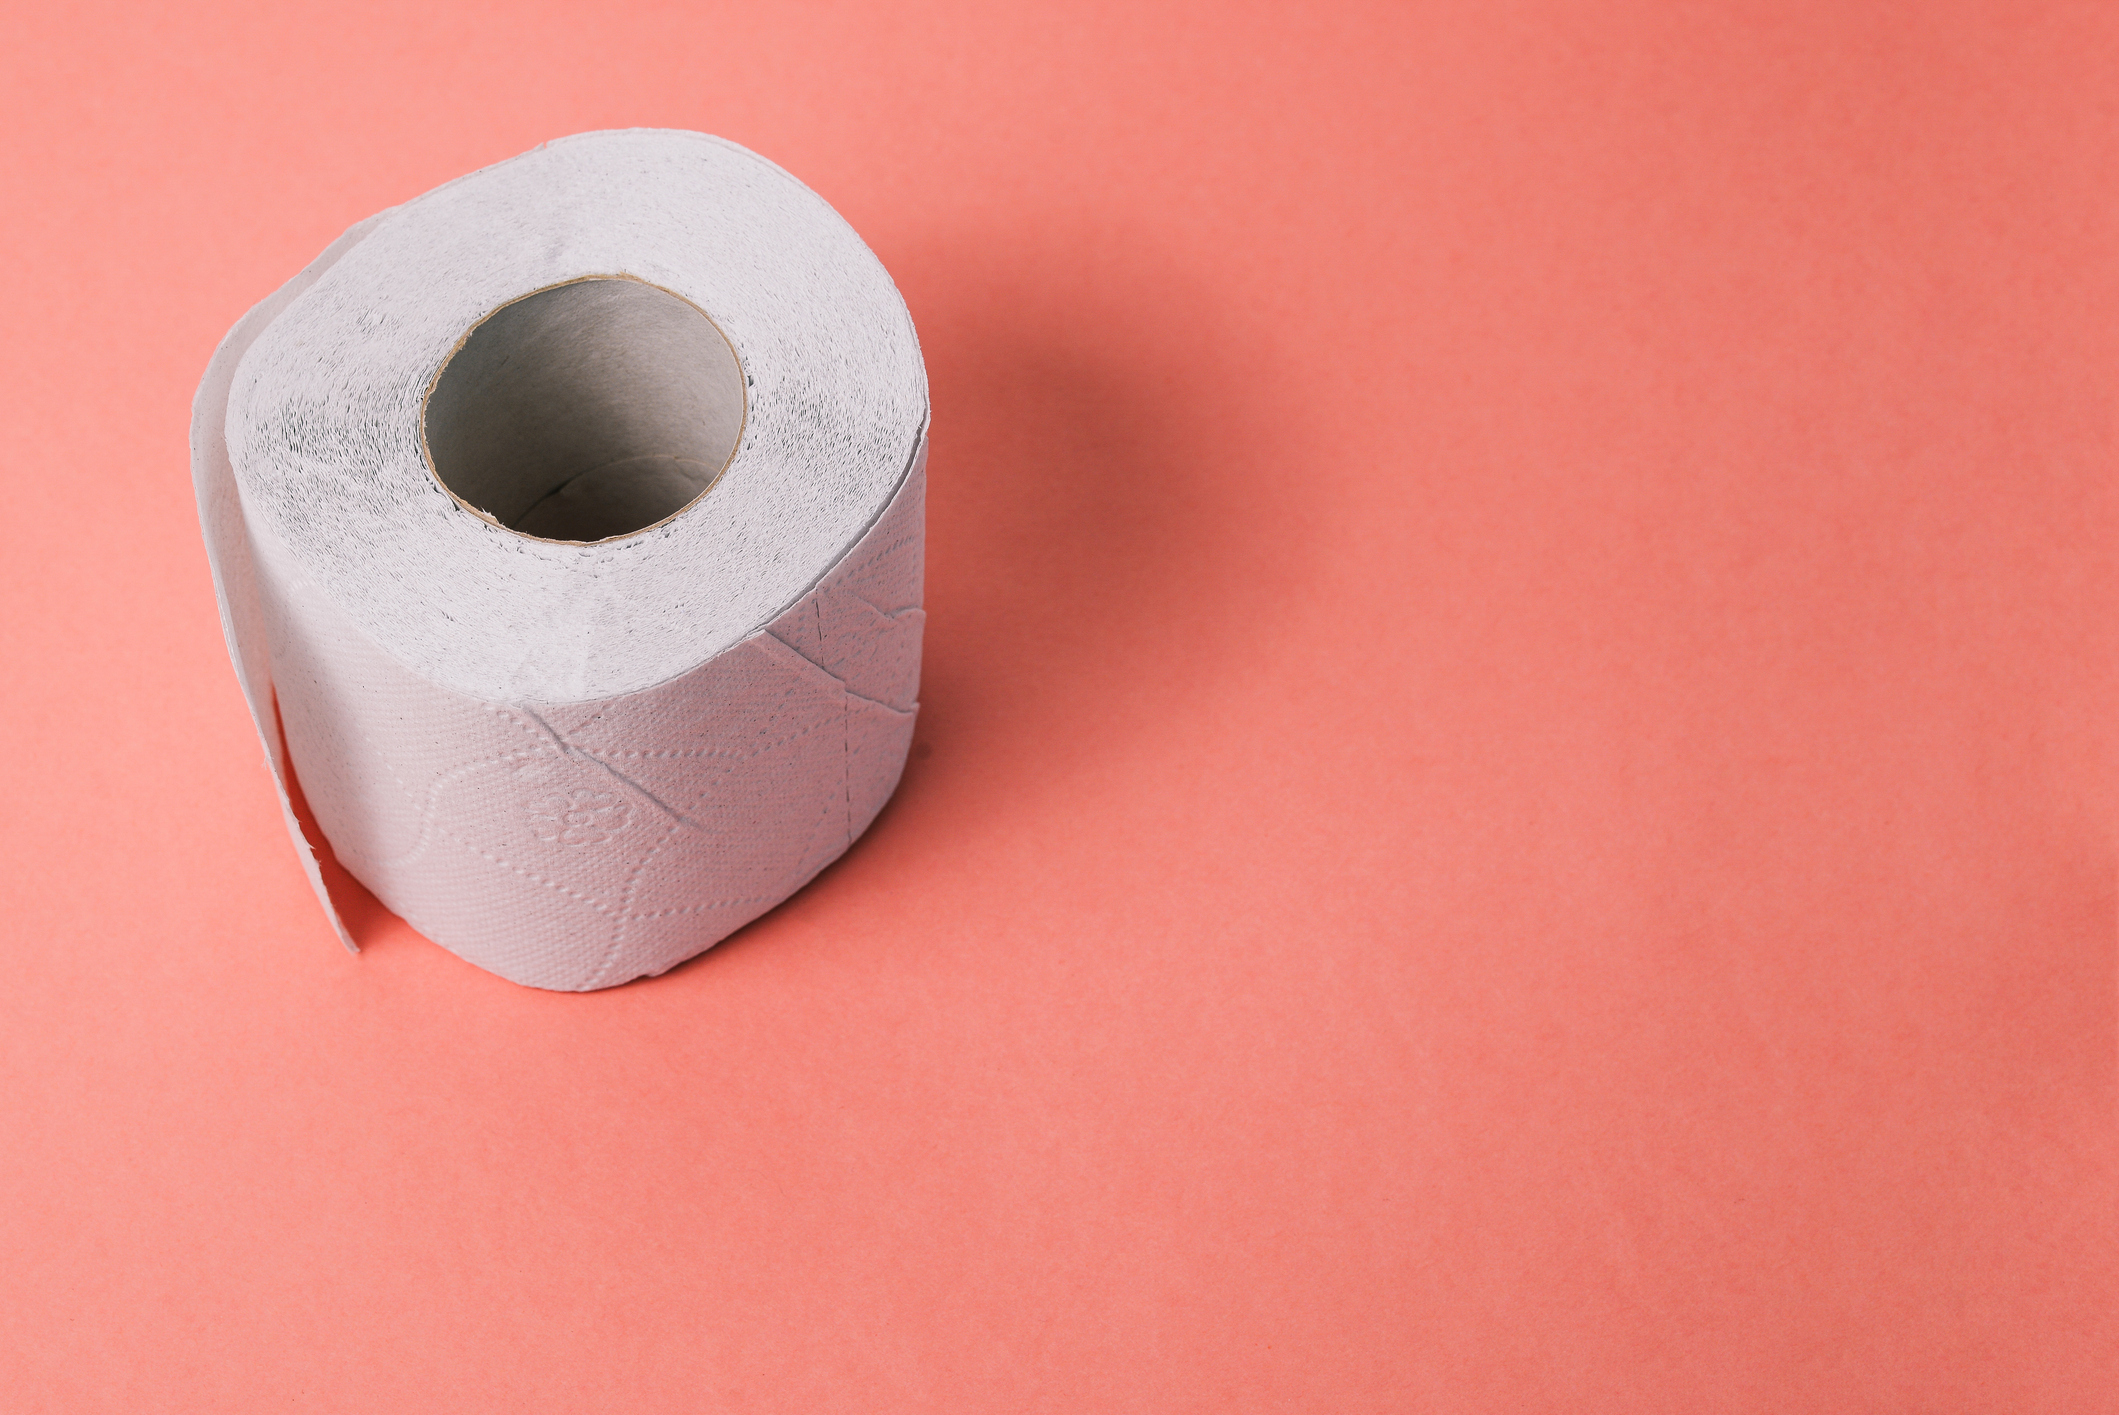 A roll of toilet paper on a plain background